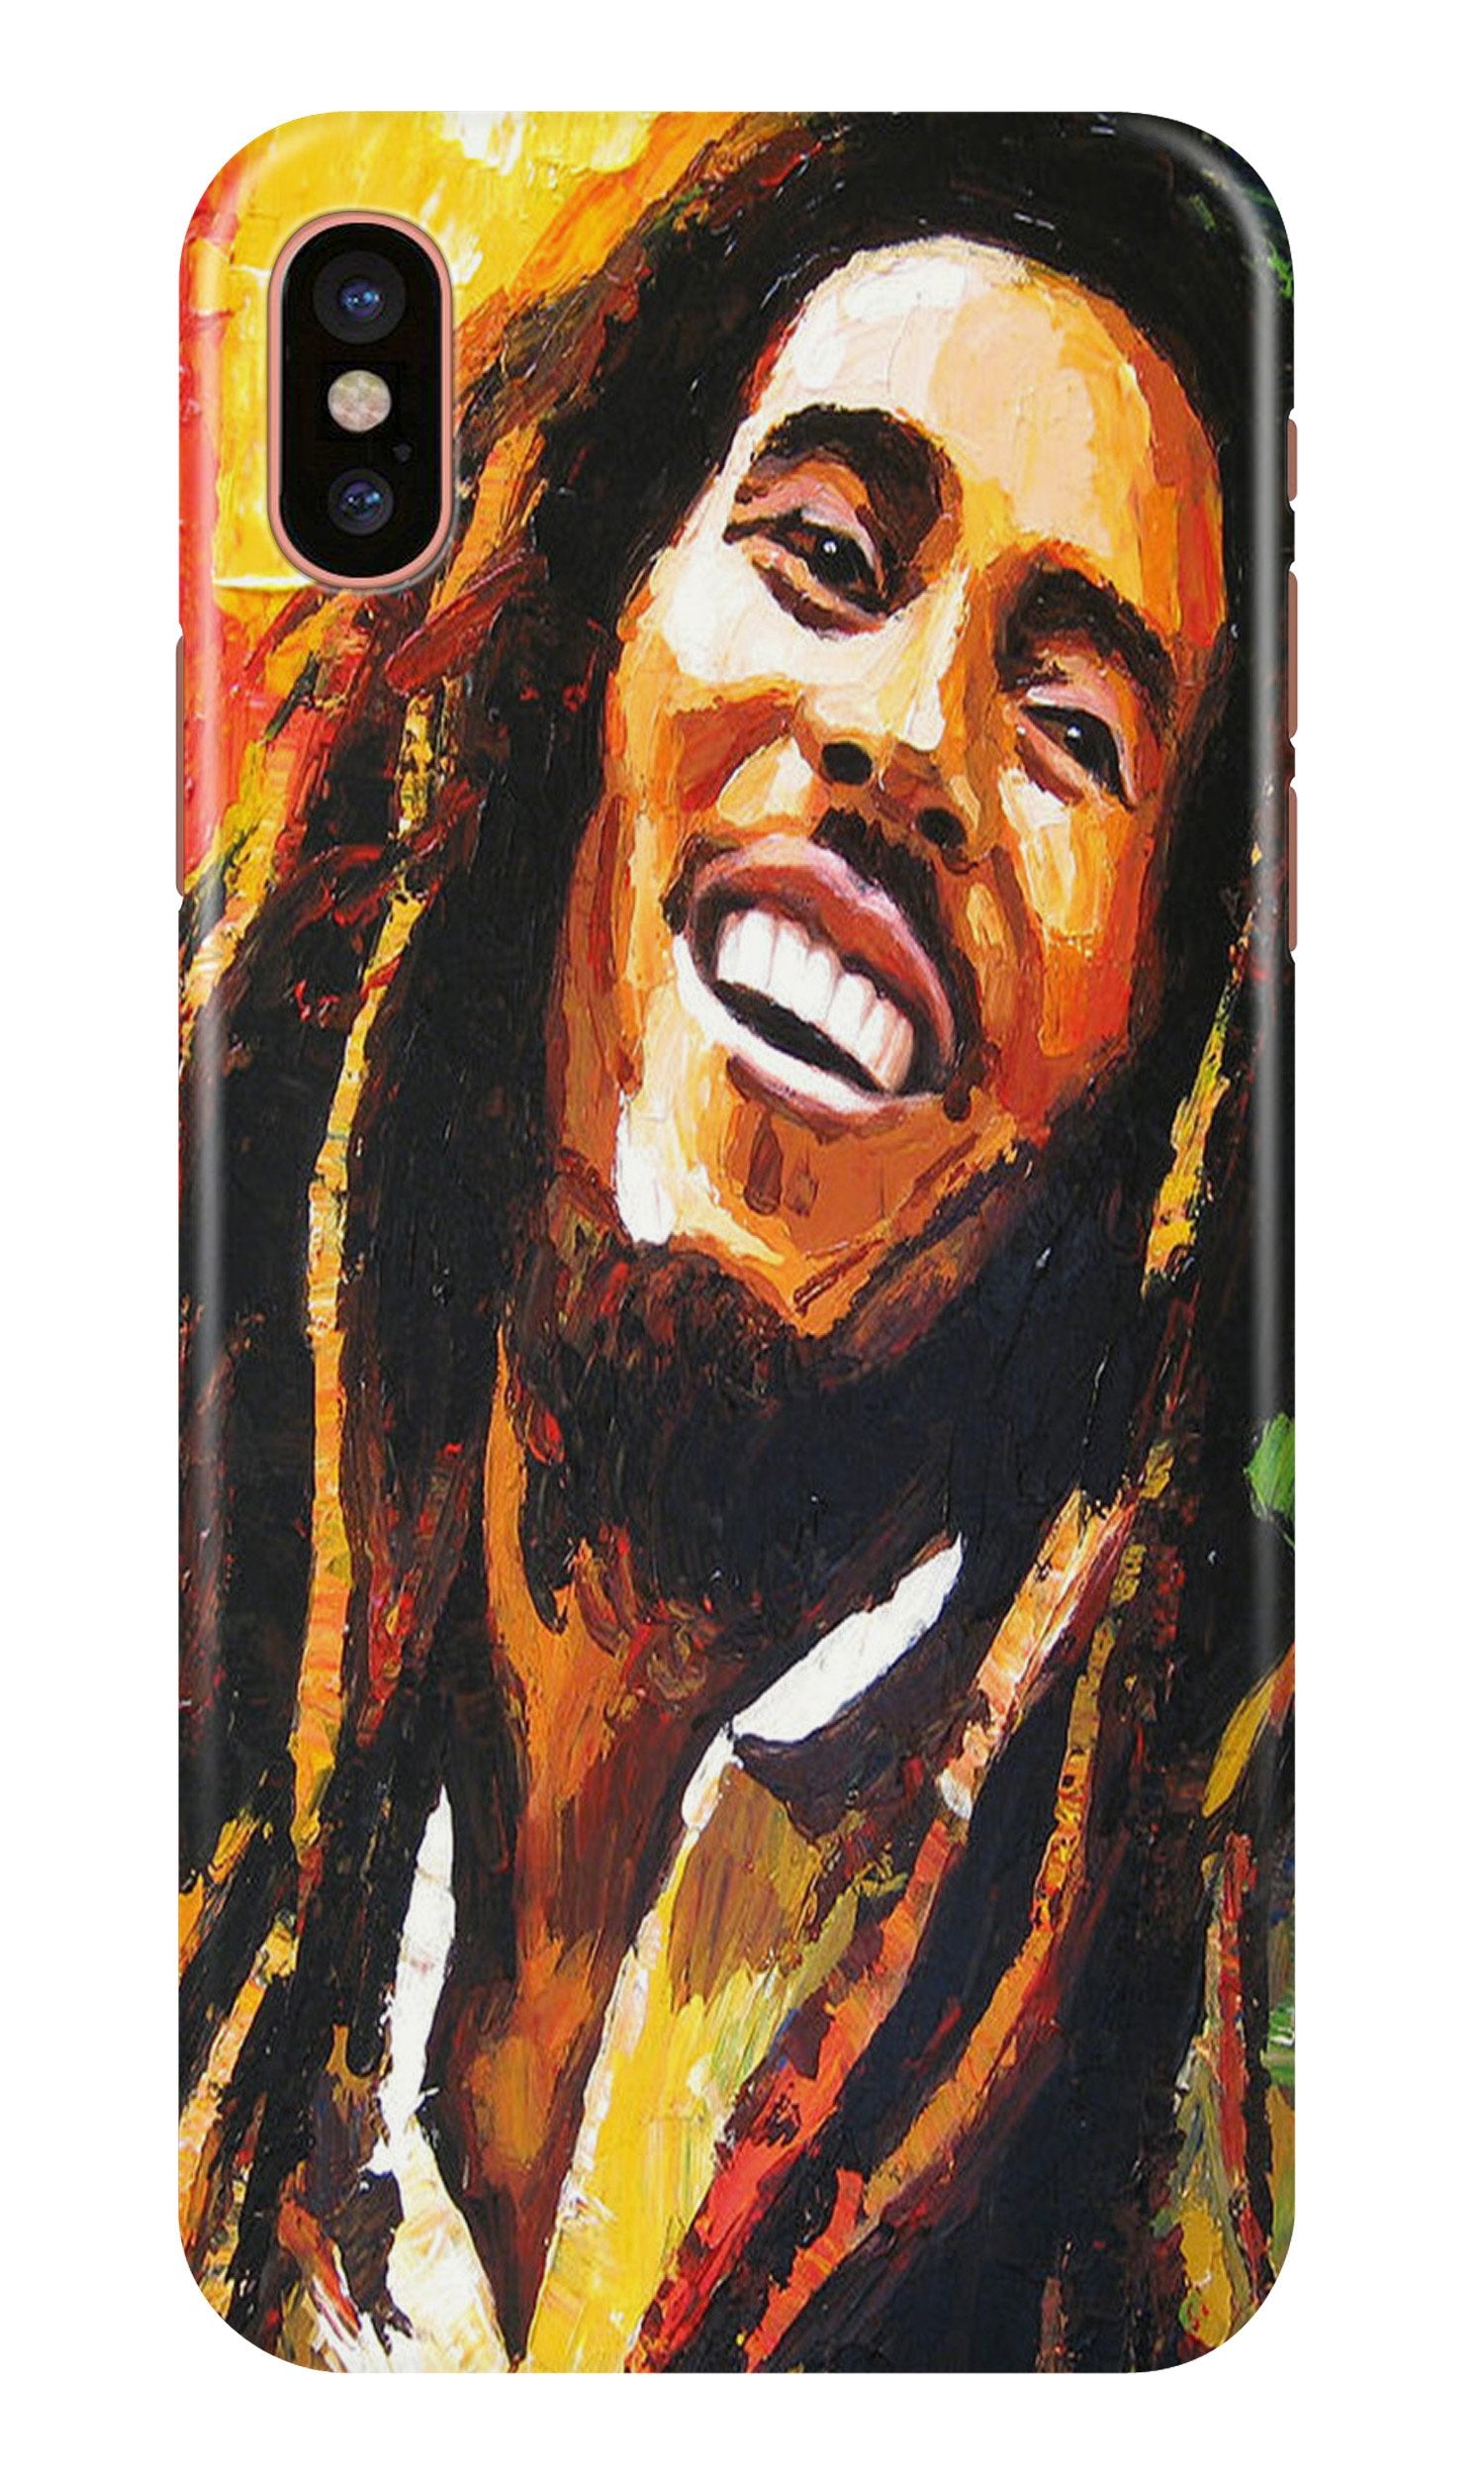 Bob marley Case for iPhone Xs Max (Design No. 295)